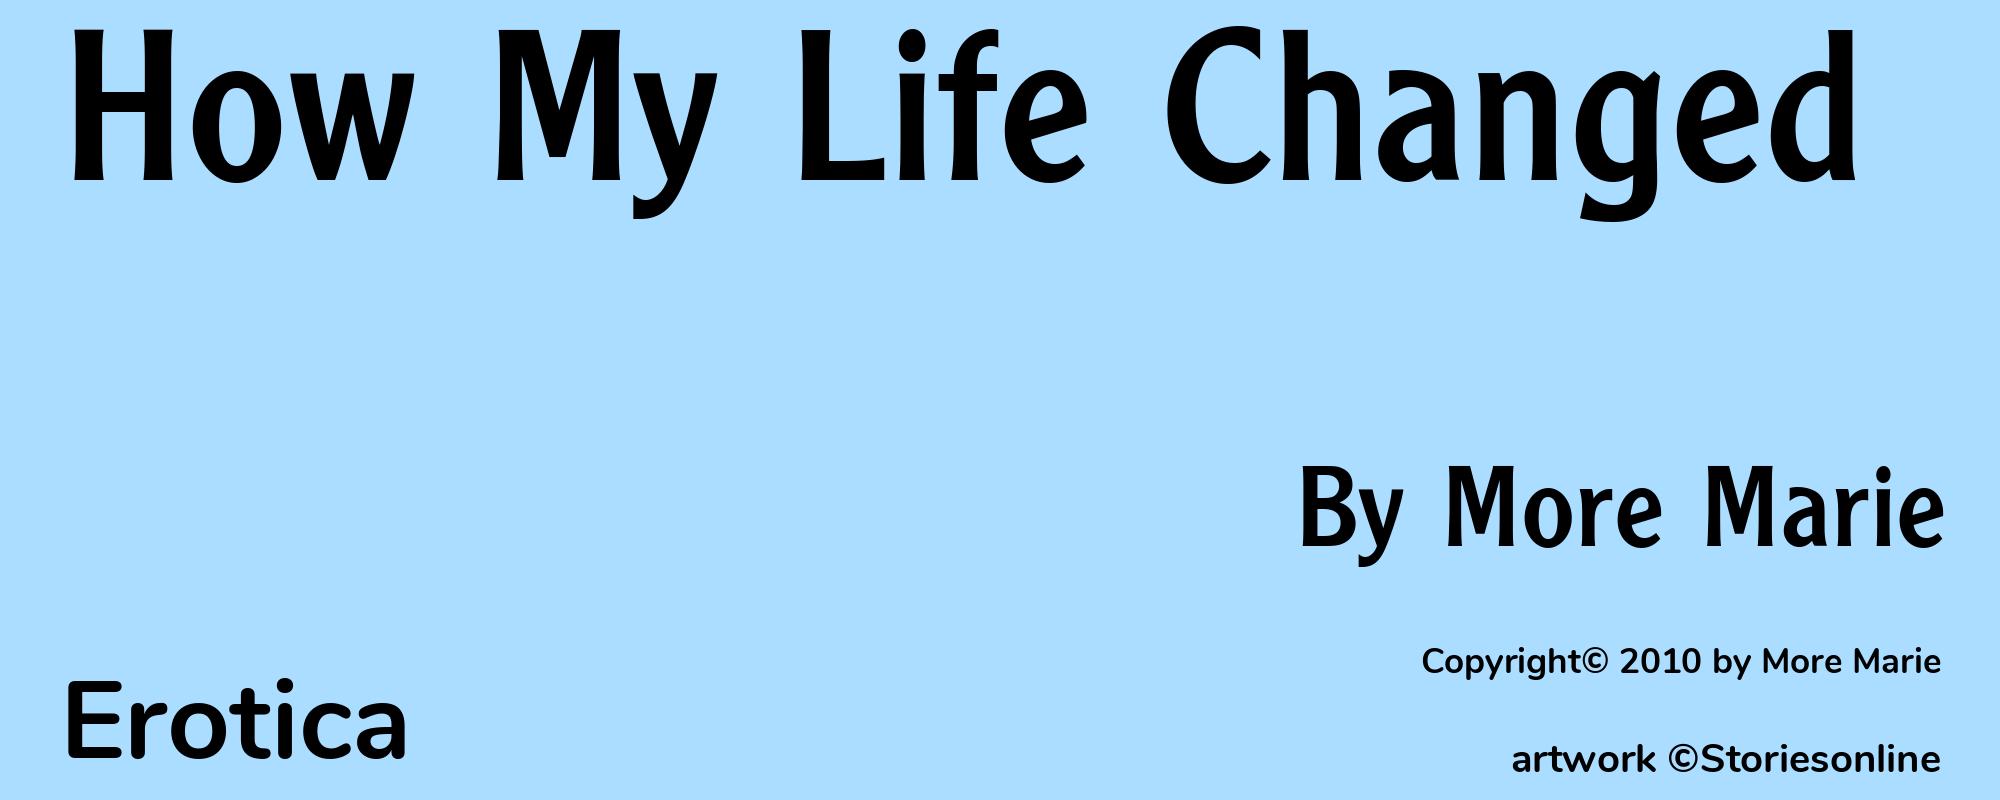 How My Life Changed - Cover